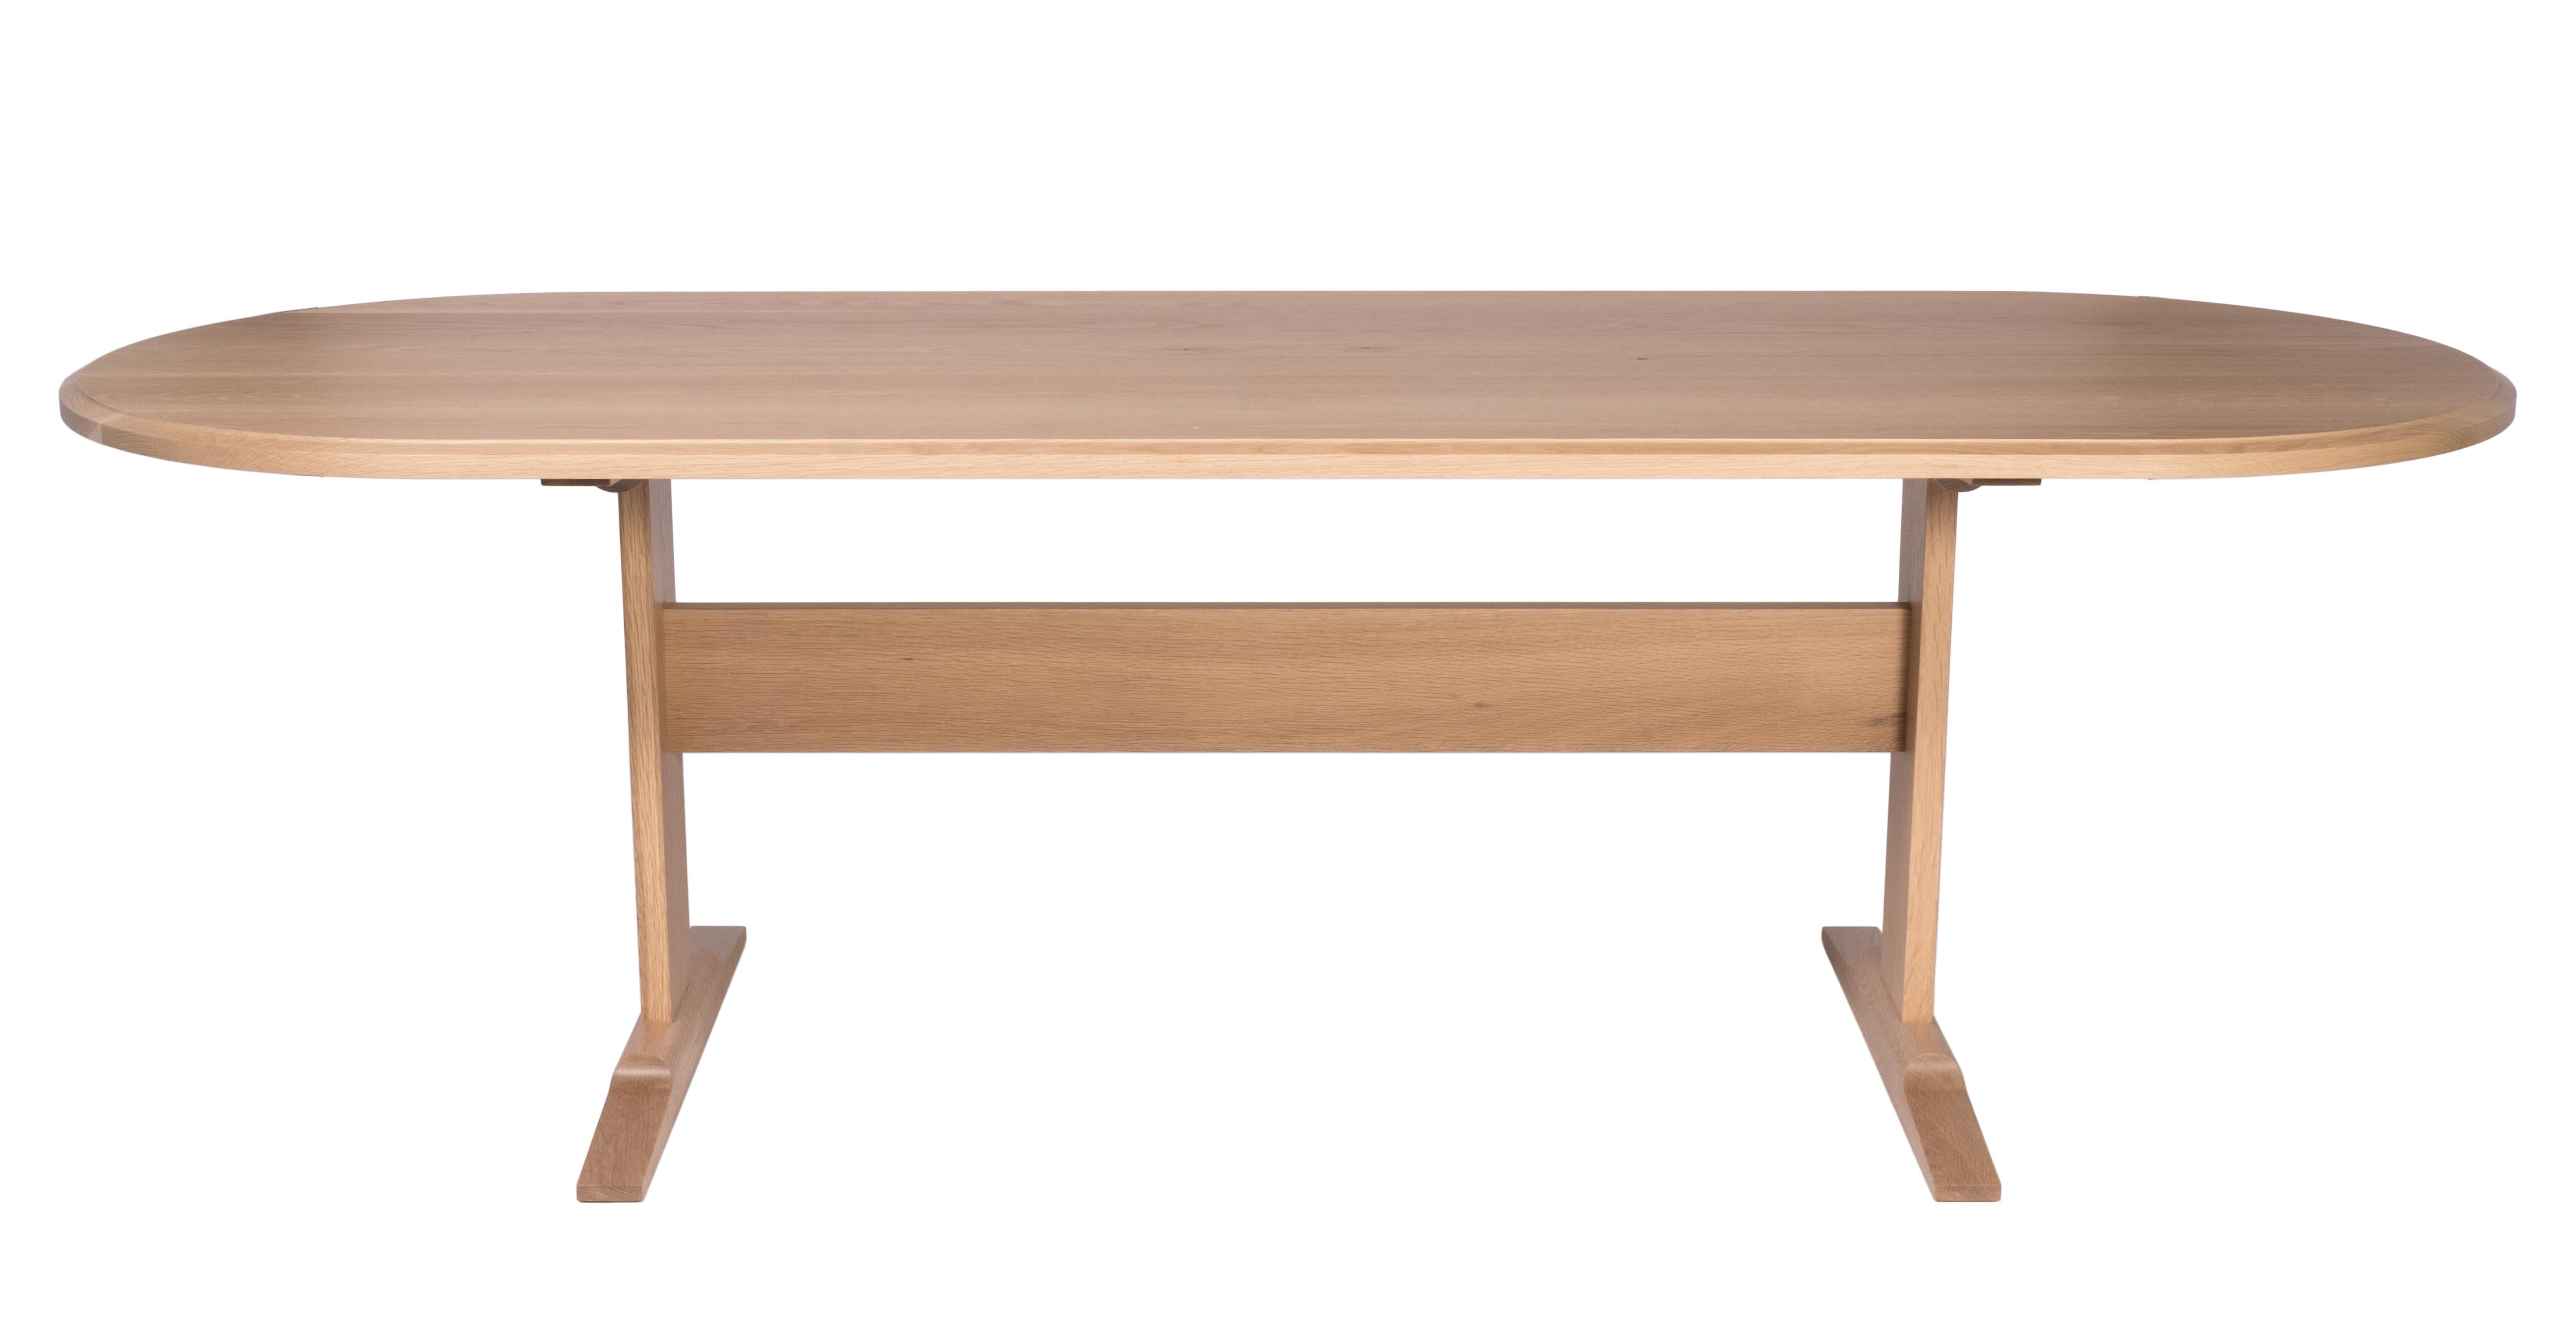 American Spade Dining Table by Tretiak Works, Modern Contemporary White Oak Trestle For Sale